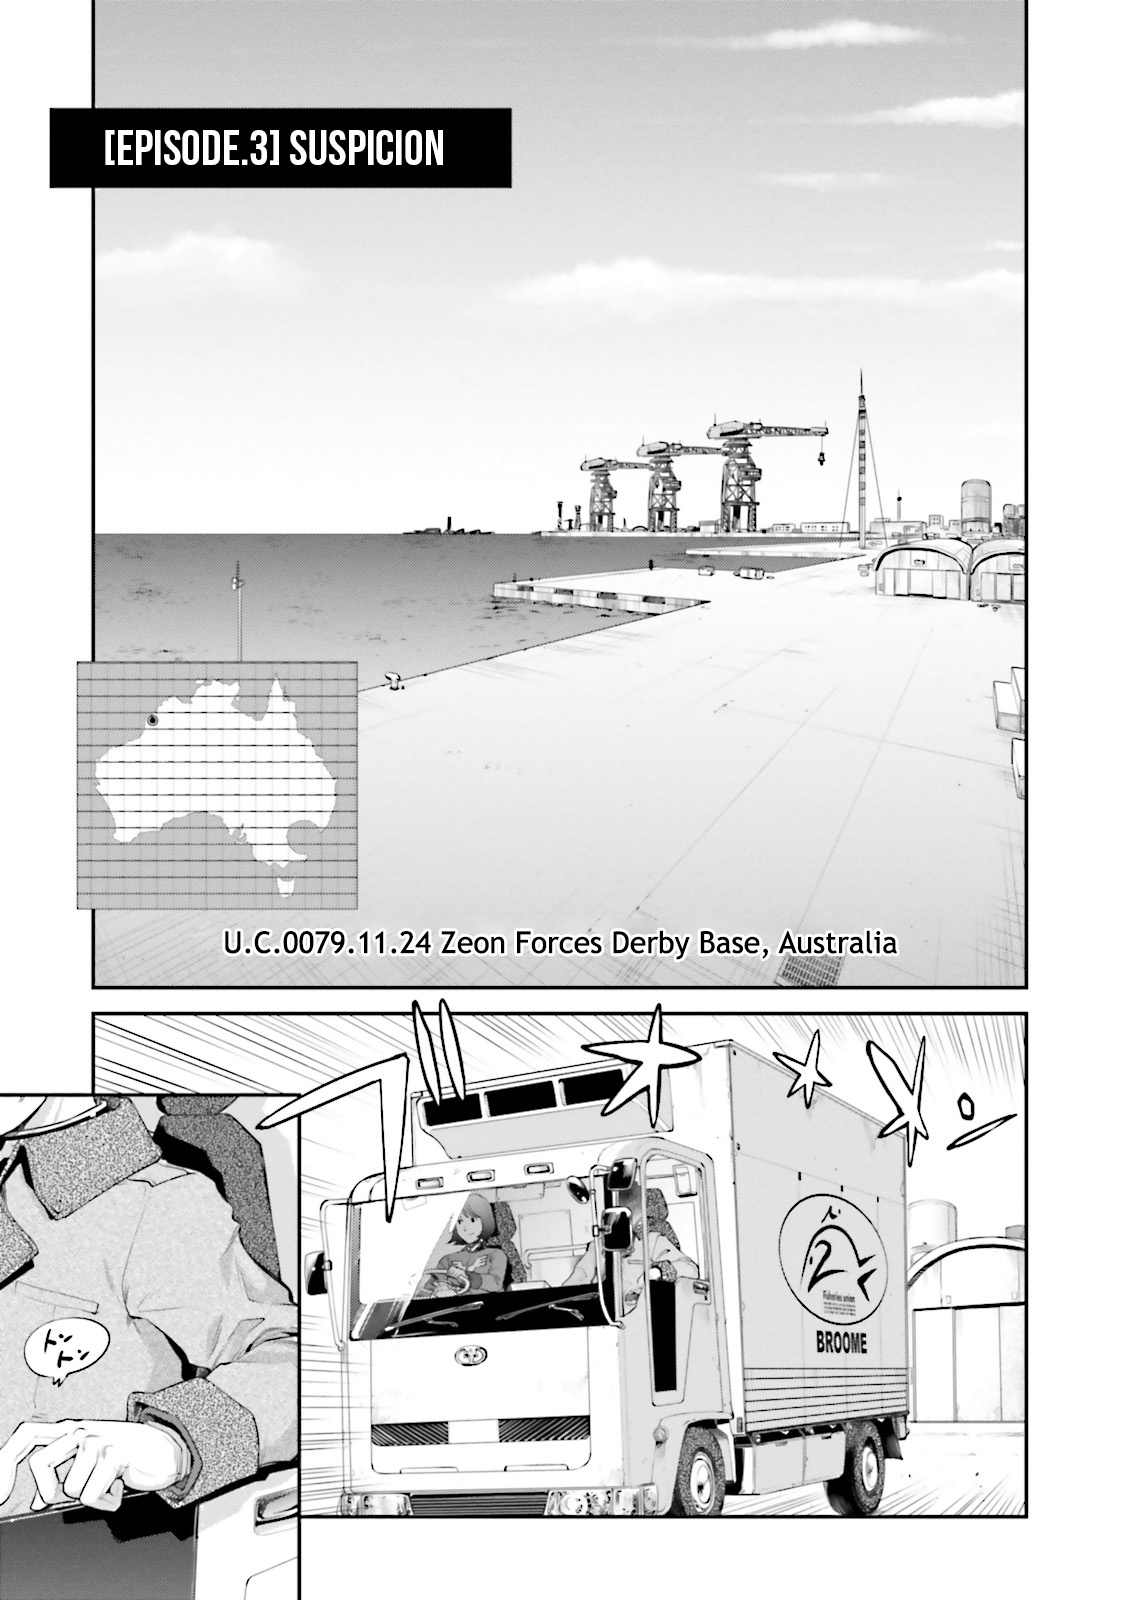 Mobile Suit Gundam Ground Zero - Rise From The Ashes Vol.1 Chapter 3: Suspicion - Picture 2